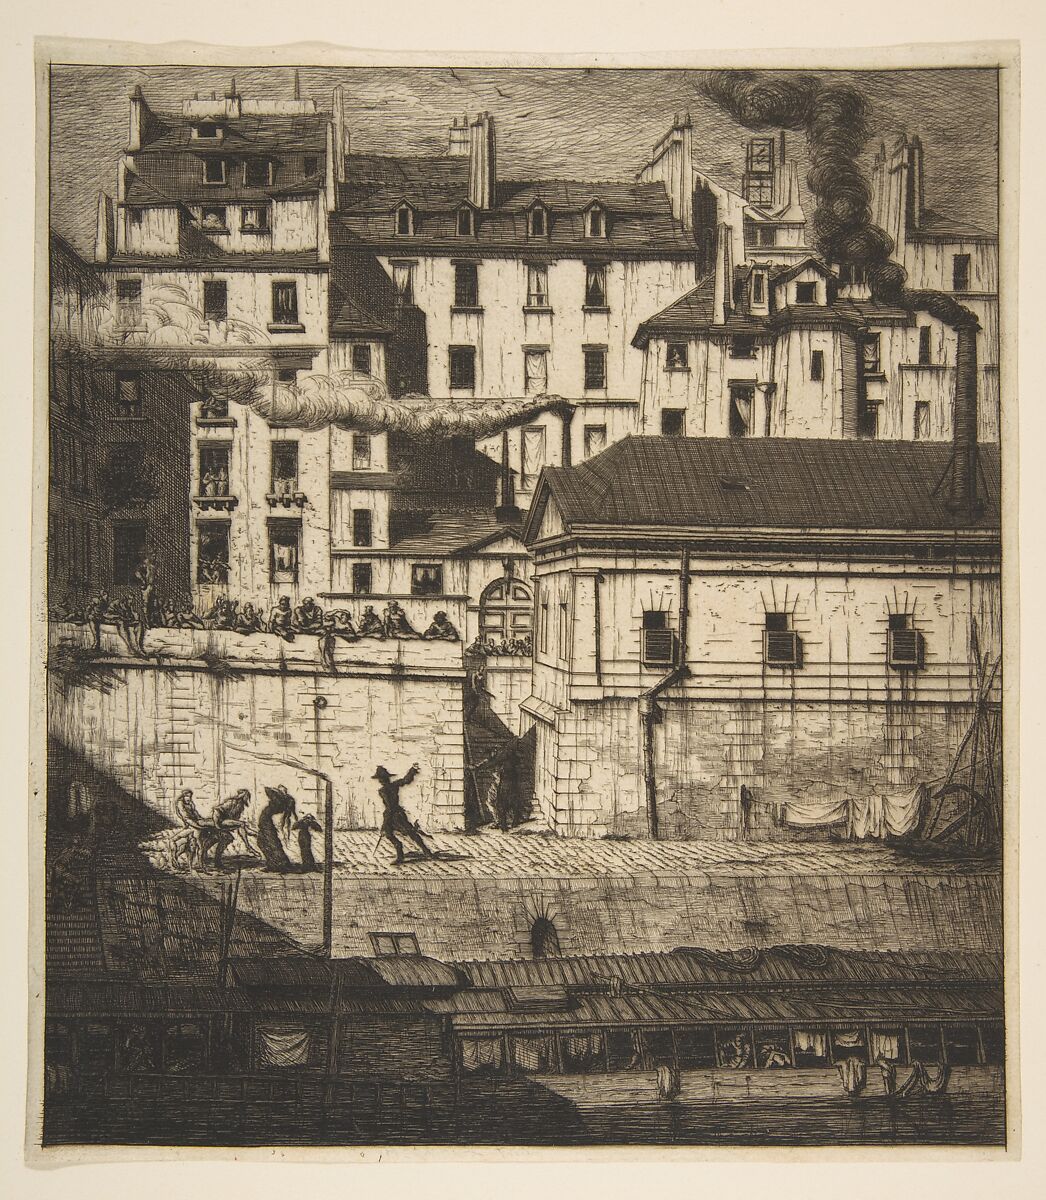 The Mortuary, Paris (La Morgue), Charles Meryon  French, Etching and drypoint on laid paper; third state of seven